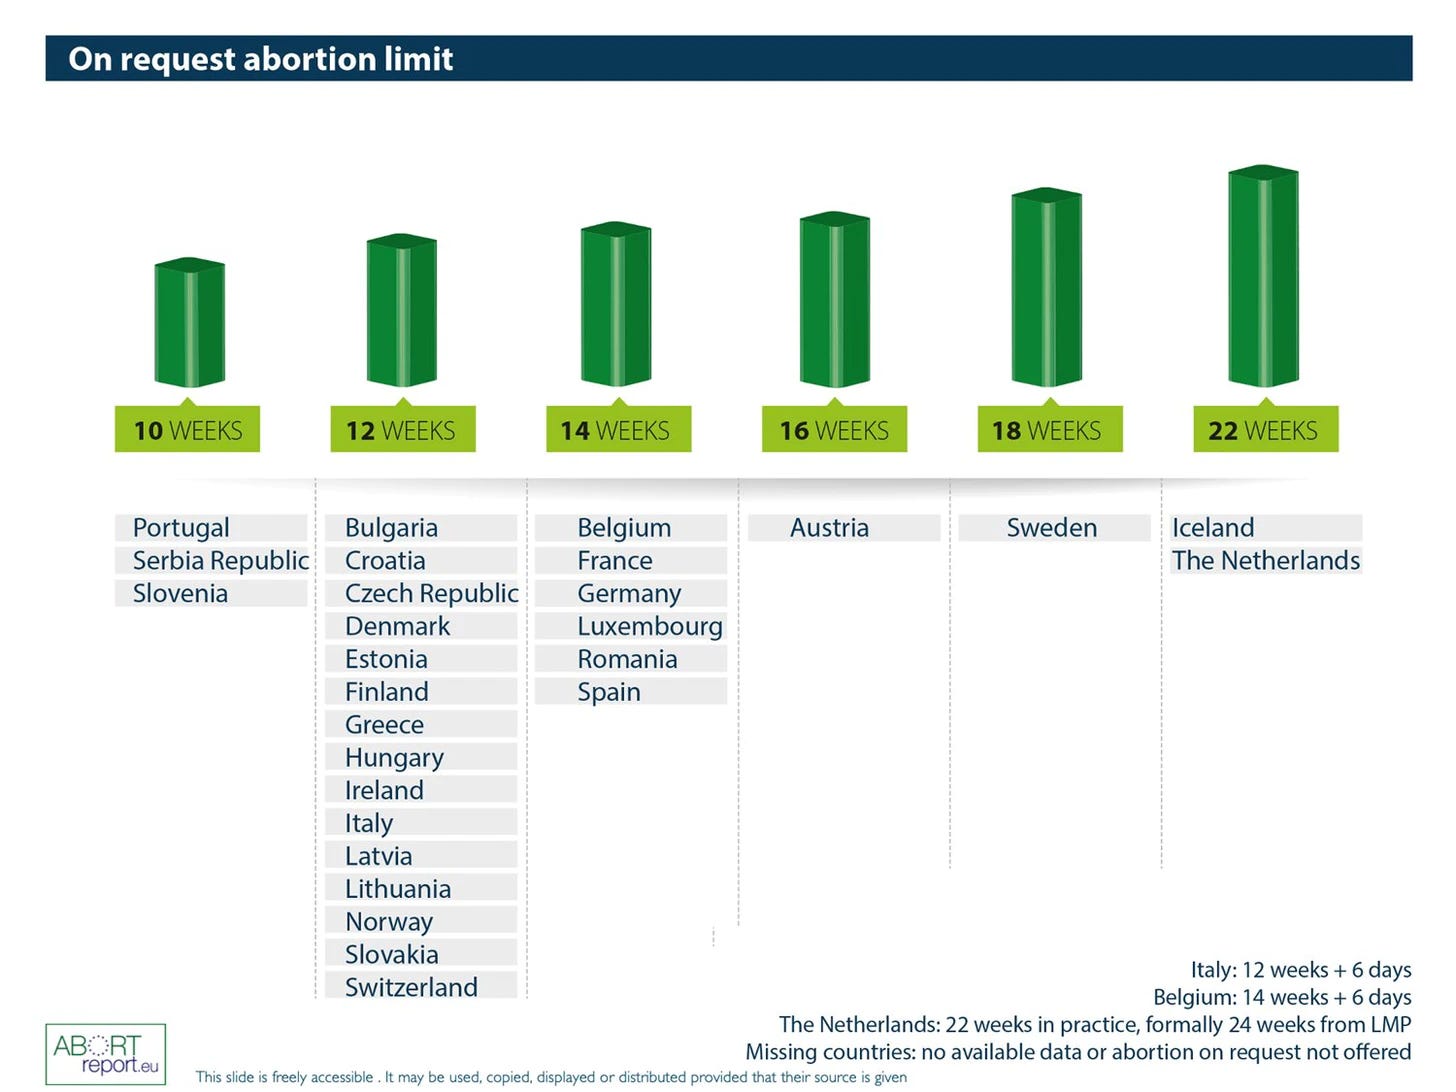 Graph showing the abortion limits and abortion bans of various European countries in the EU. Portugal, Serbia, and Slovenia limit abortion after 10 weeks. Bulgaria, Croatia, Czech Republic, Denmark, Estonia, Finland, Greece, Hungary, Ireland, Italy, Latvia, Lithuania, Norway, Slovakia, Switzerland ban abortion after 12 weeks. Belgium, France, Germany, Luxembourg, Romania, and Spain limit abortion after 14 weeks. Austria limits abortion after 16 weeks. Sweden has an abortion ban after 18 weeks. Iceland and The Netherlands limit abortion after 22 weeks. 